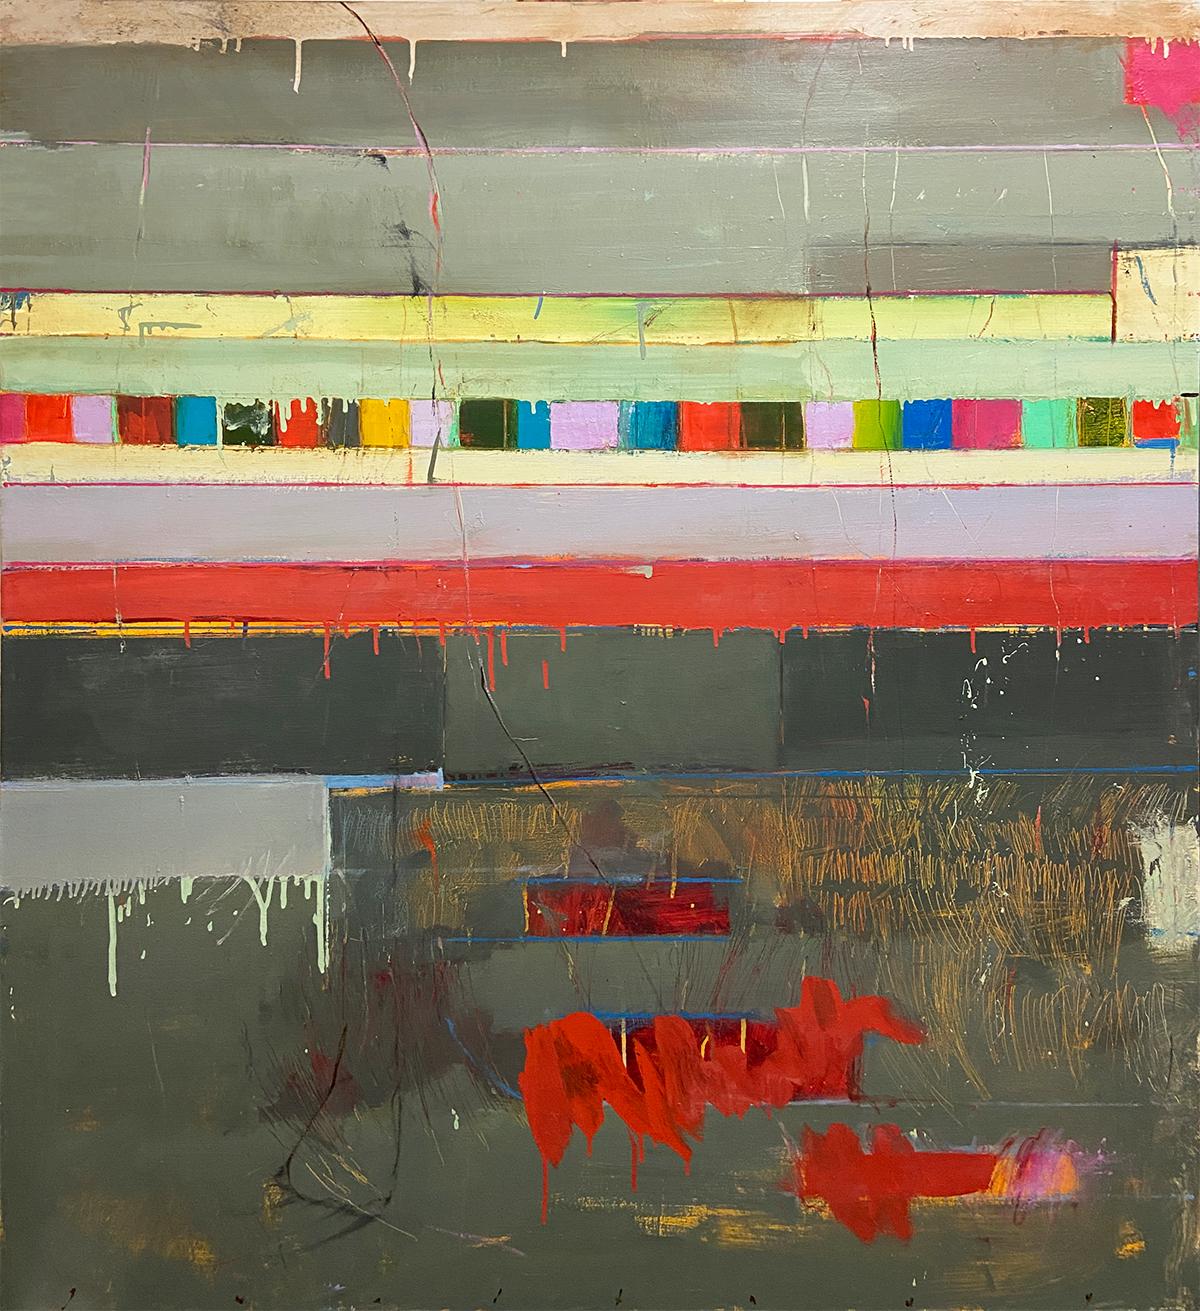 Balancing between abstraction and figurative, the works of Chris Gwaltney (b. 1953) are evocative, luminous, and lush. He balances color with unexpected washes and scribbles; scraping physically from the surface as he generously slaps paint onto the